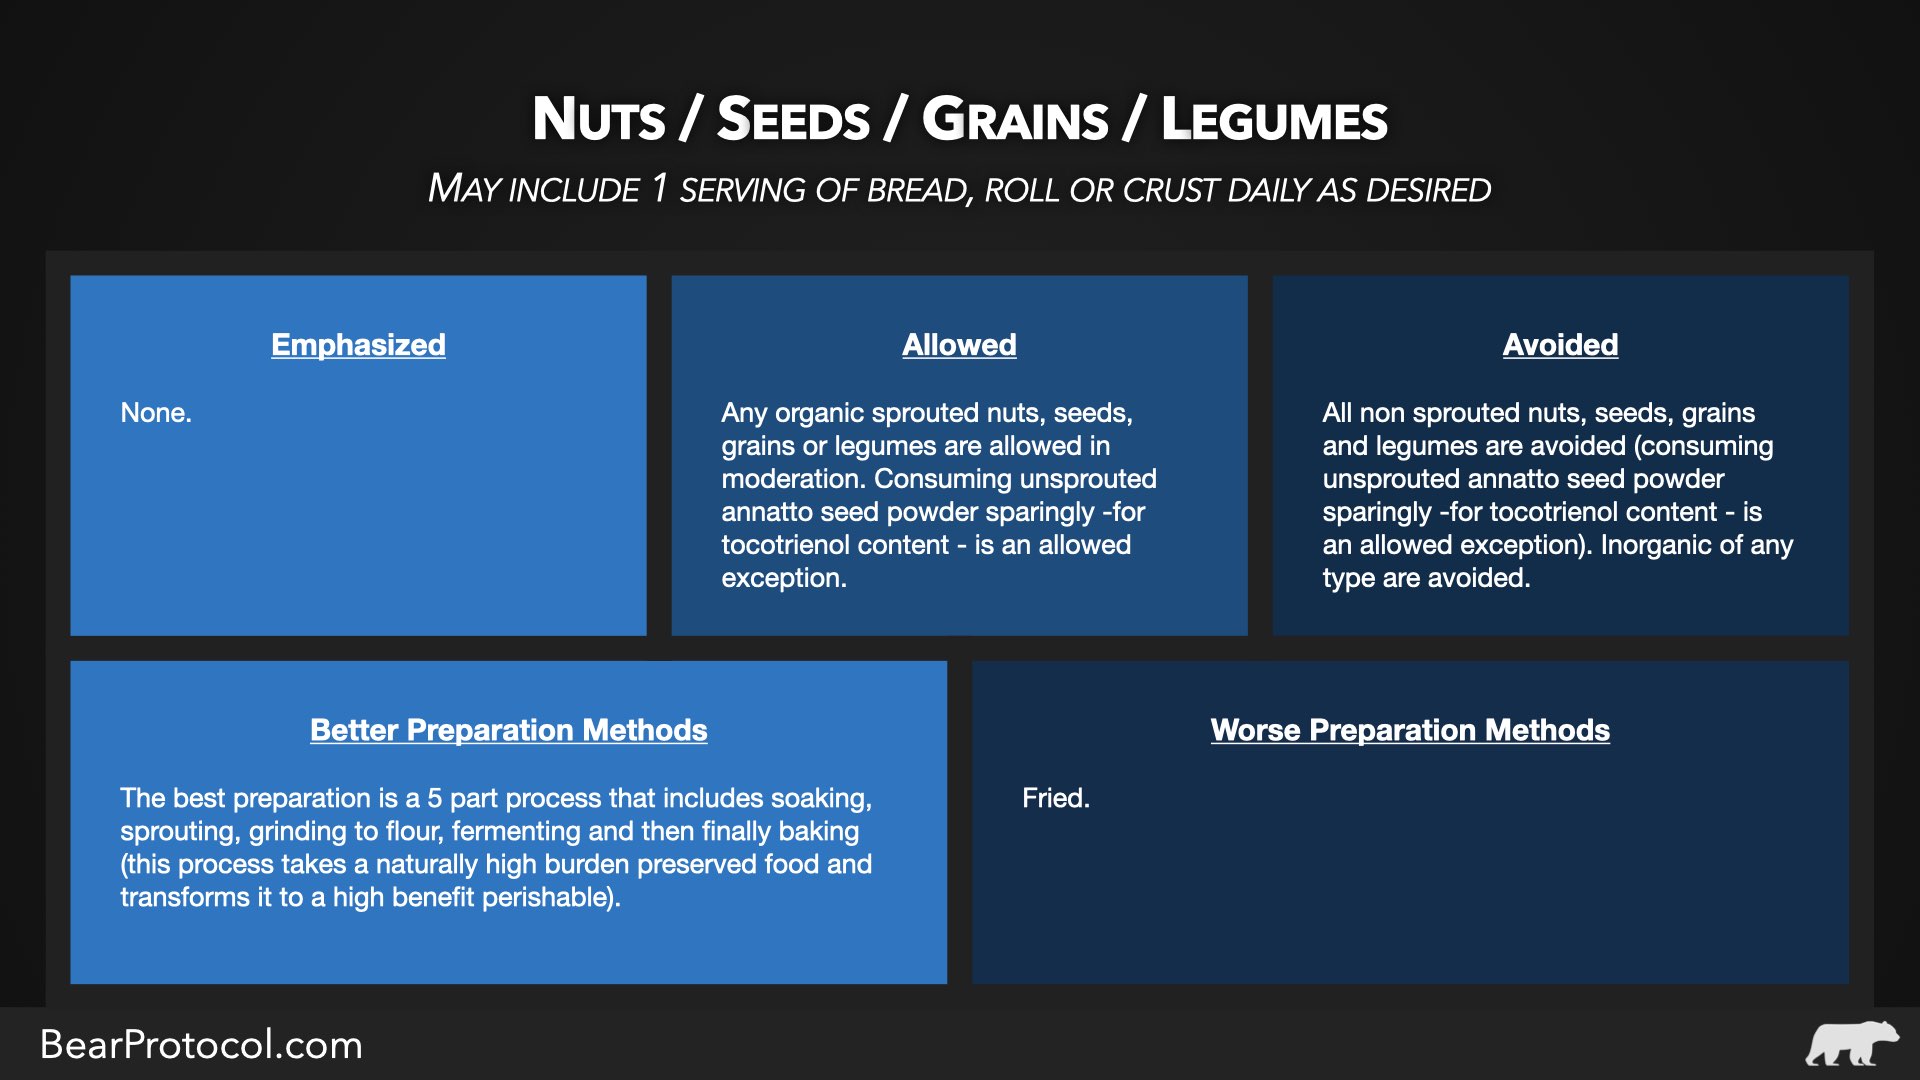 The healthy way to eat nuts, seeds, grains and legumes